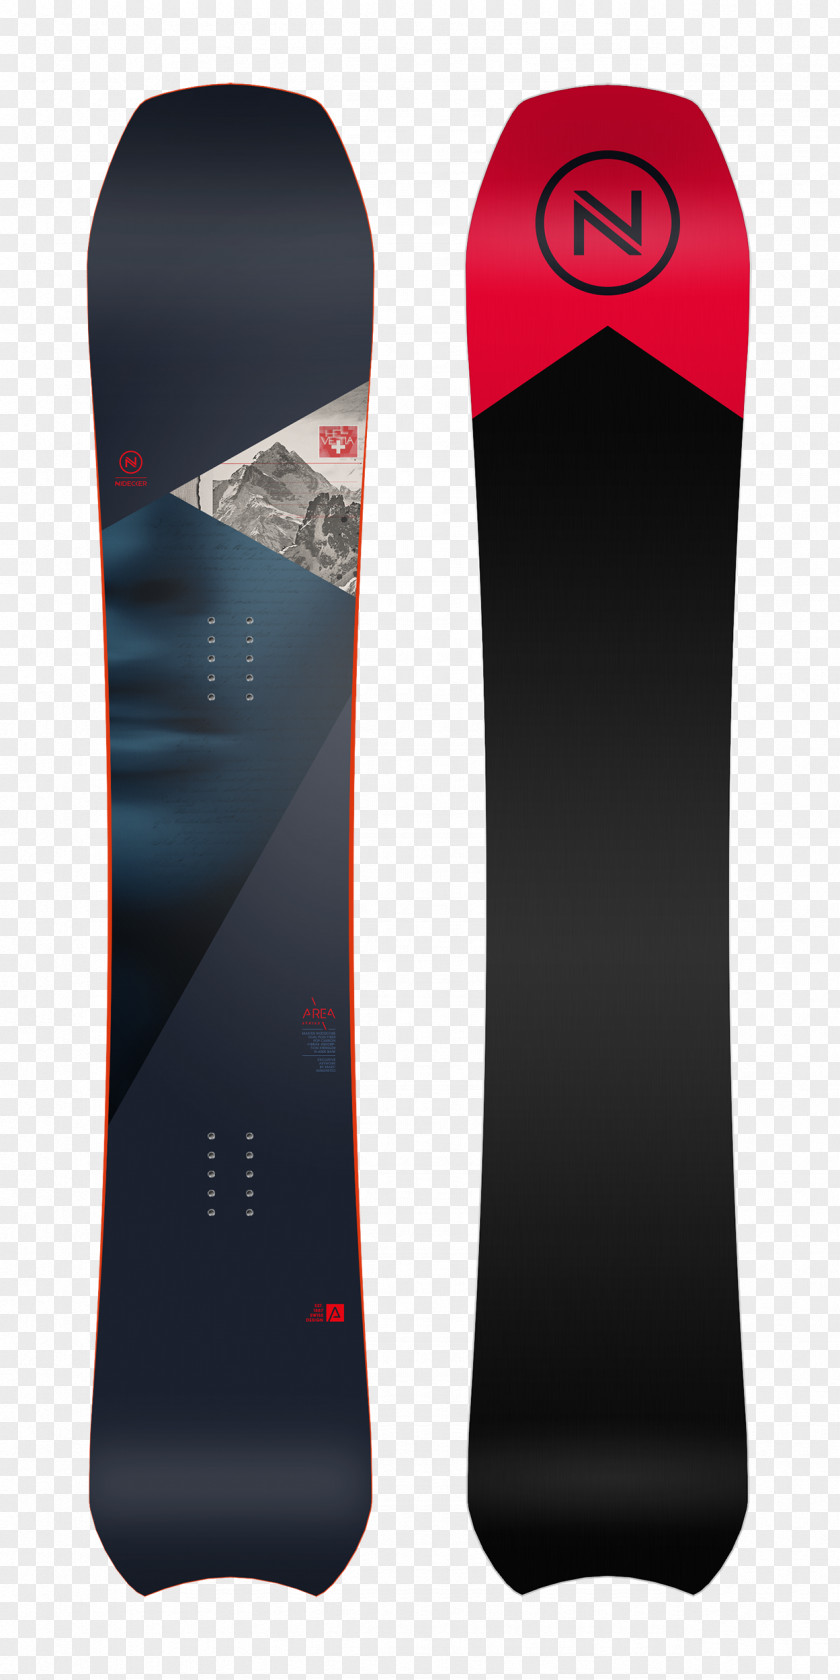 Snowboard Nidecker Snowboarding Carve Turn Backcountry Skiing PNG